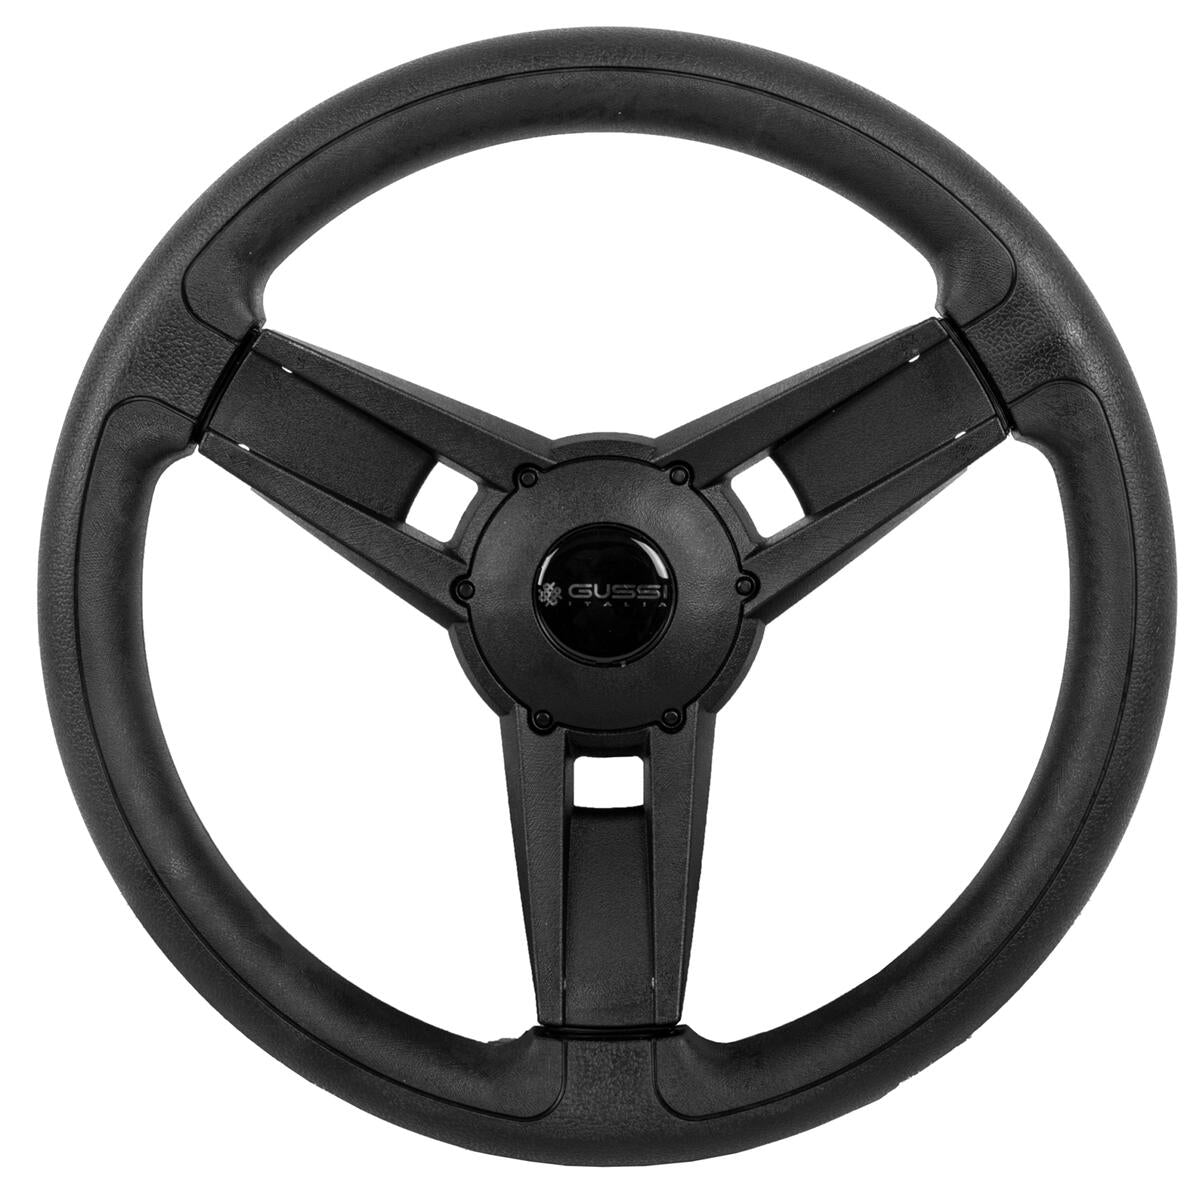 Gussi Italia Giazza Black Steering Wheel Compatible with ICON Golf Car Models & AEV Golf Car Models 06-163